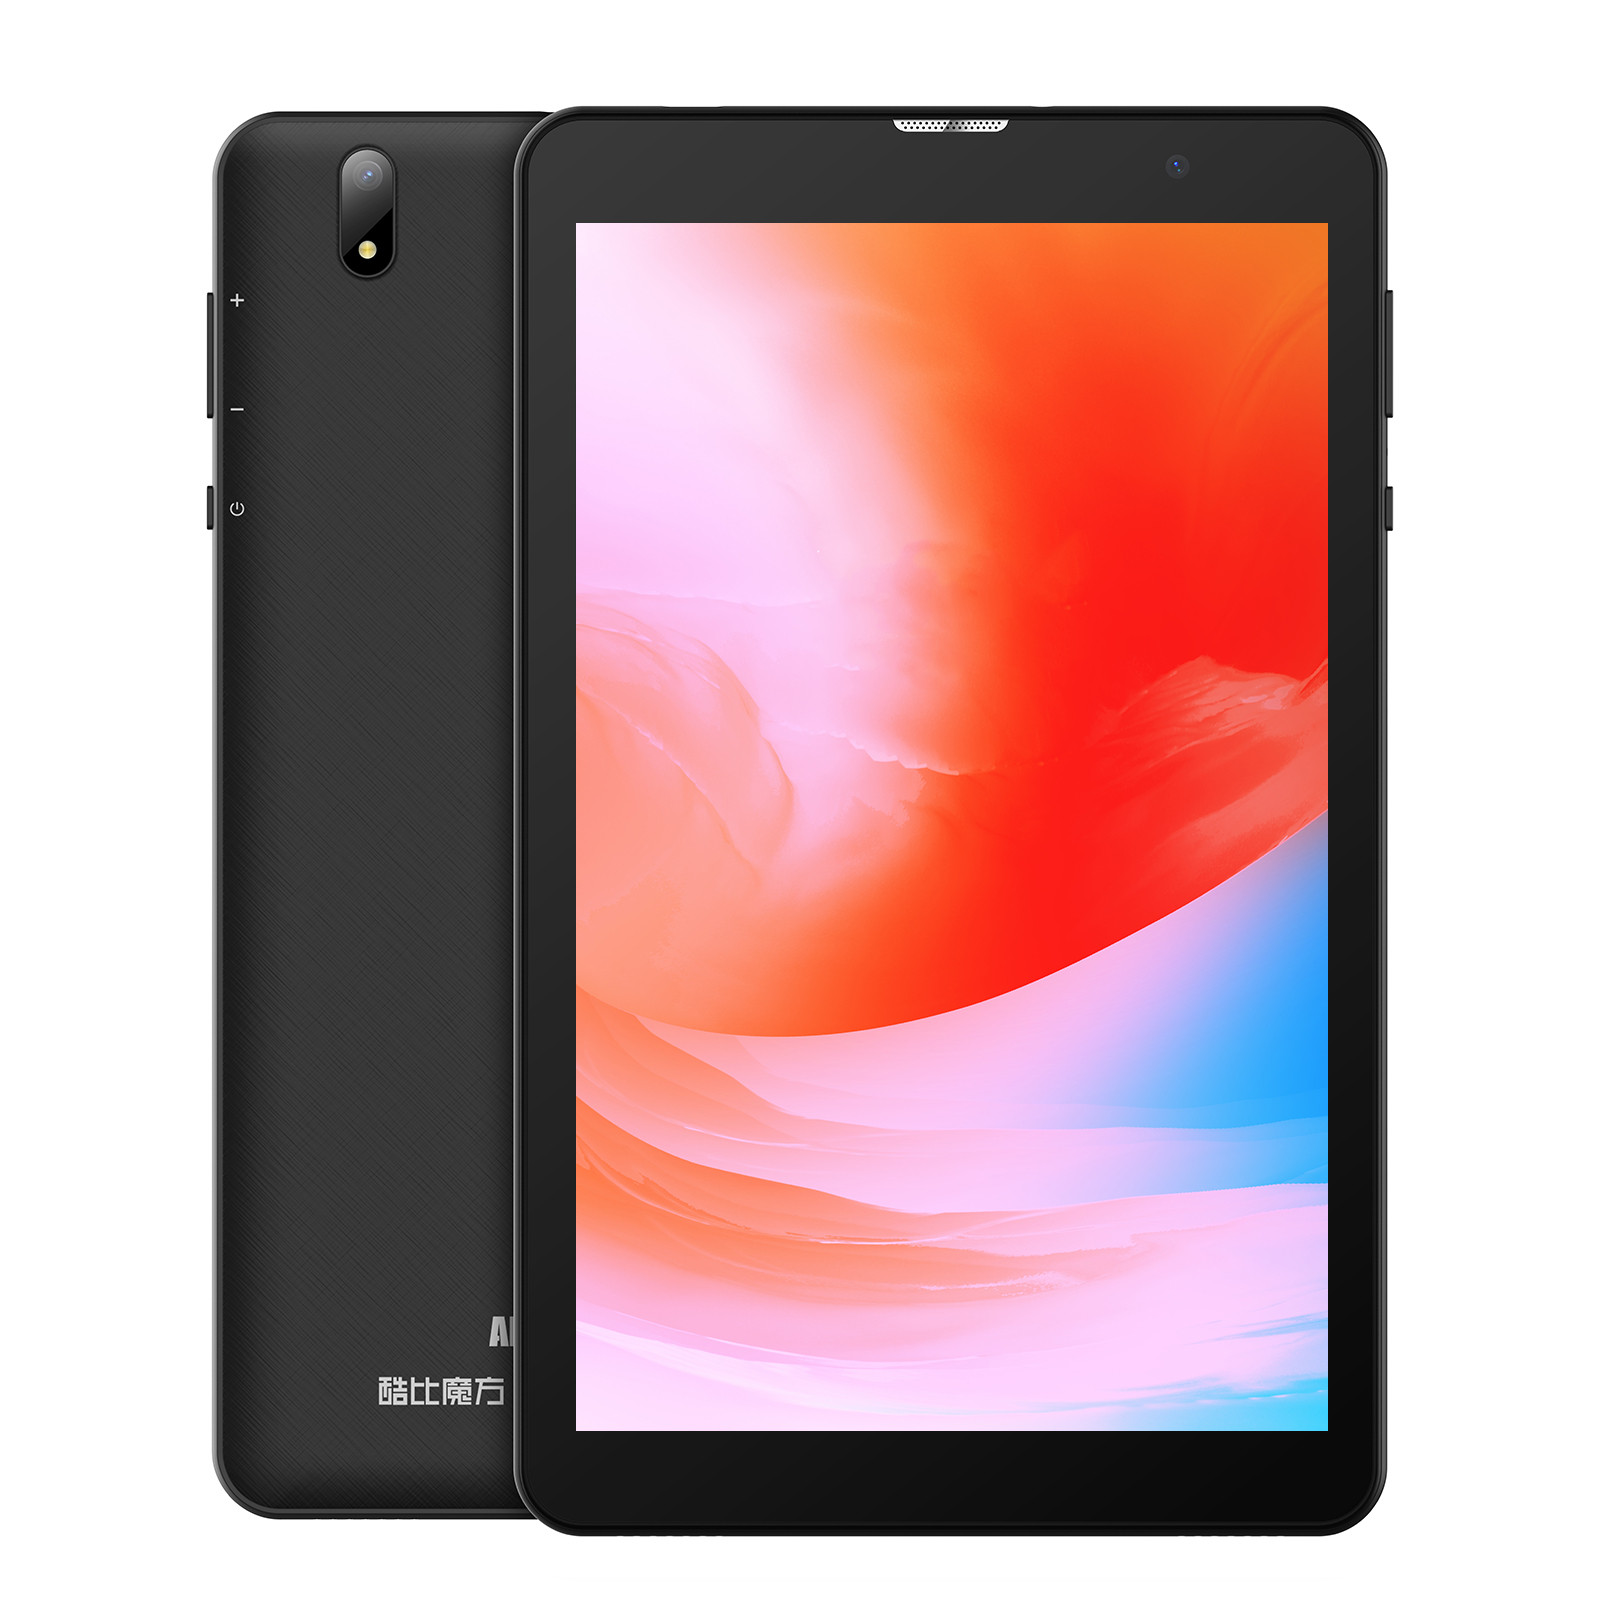 Find Alldocube Smile 1 UNISOC T310 Quad Core 3GB RAM 32GB ROM 4G LTE 8 Inch Android 11 Tablet for Sale on Gipsybee.com with cryptocurrencies